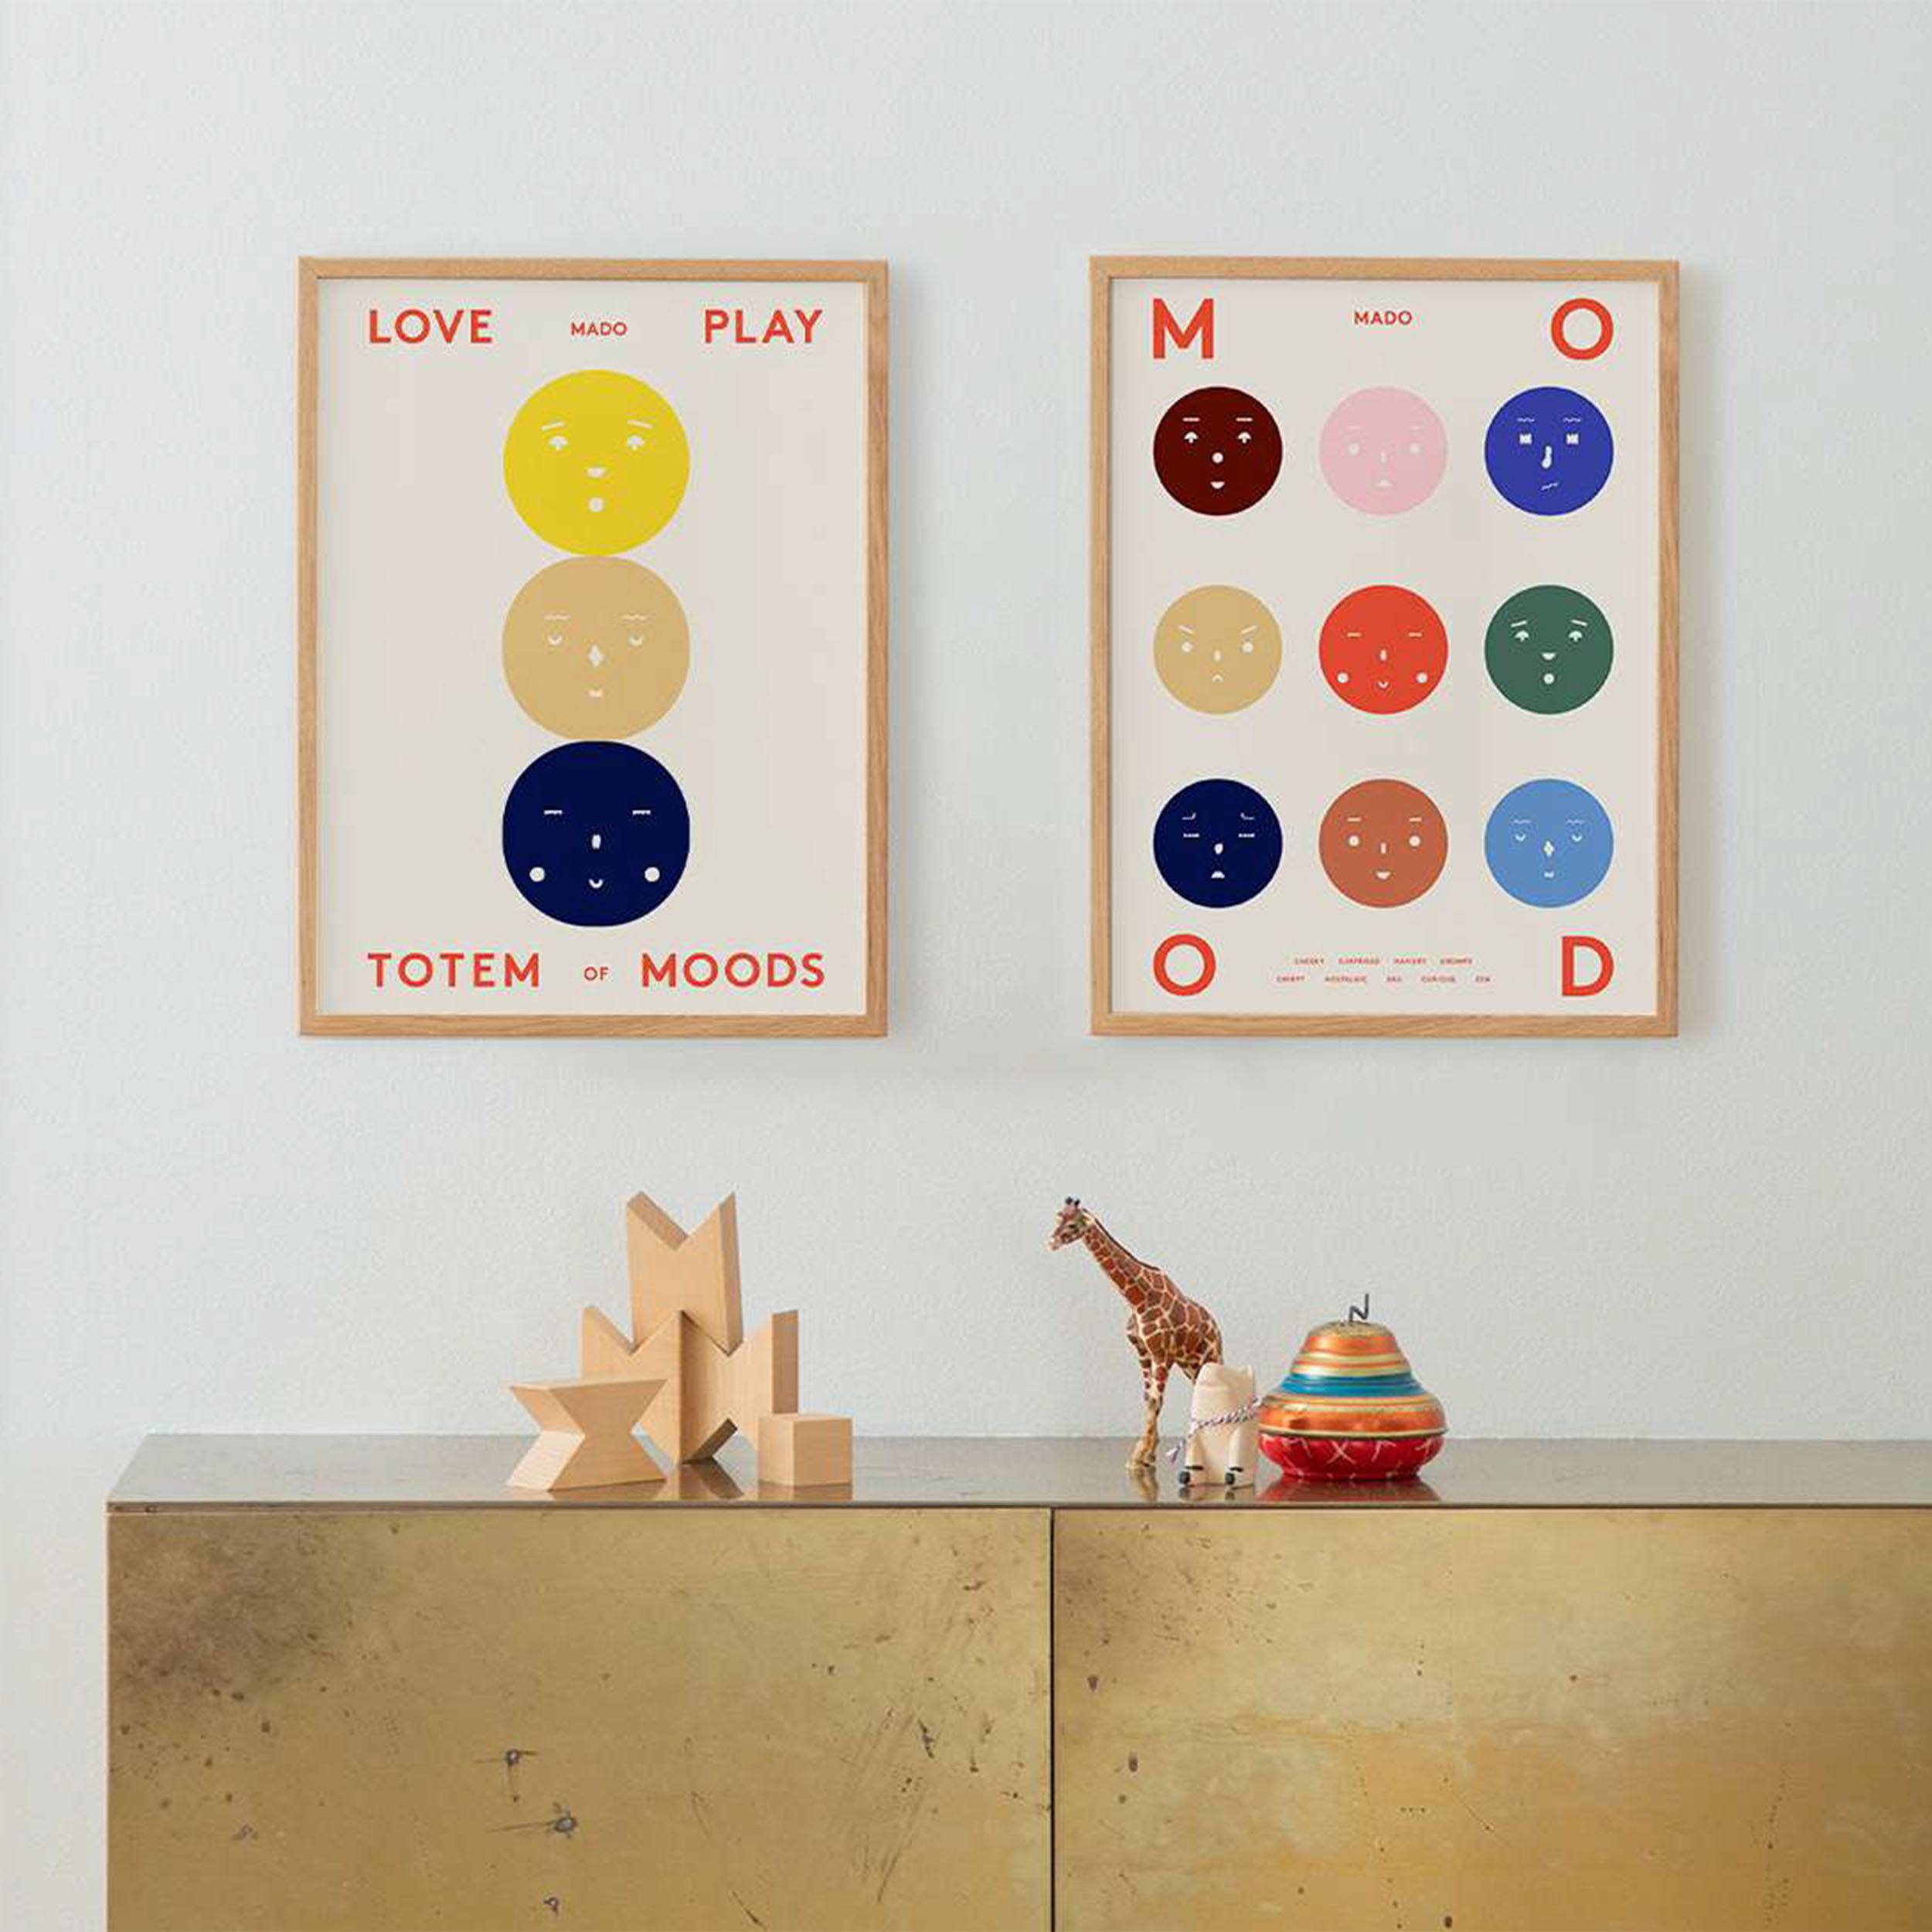 Totem of Moods Poster